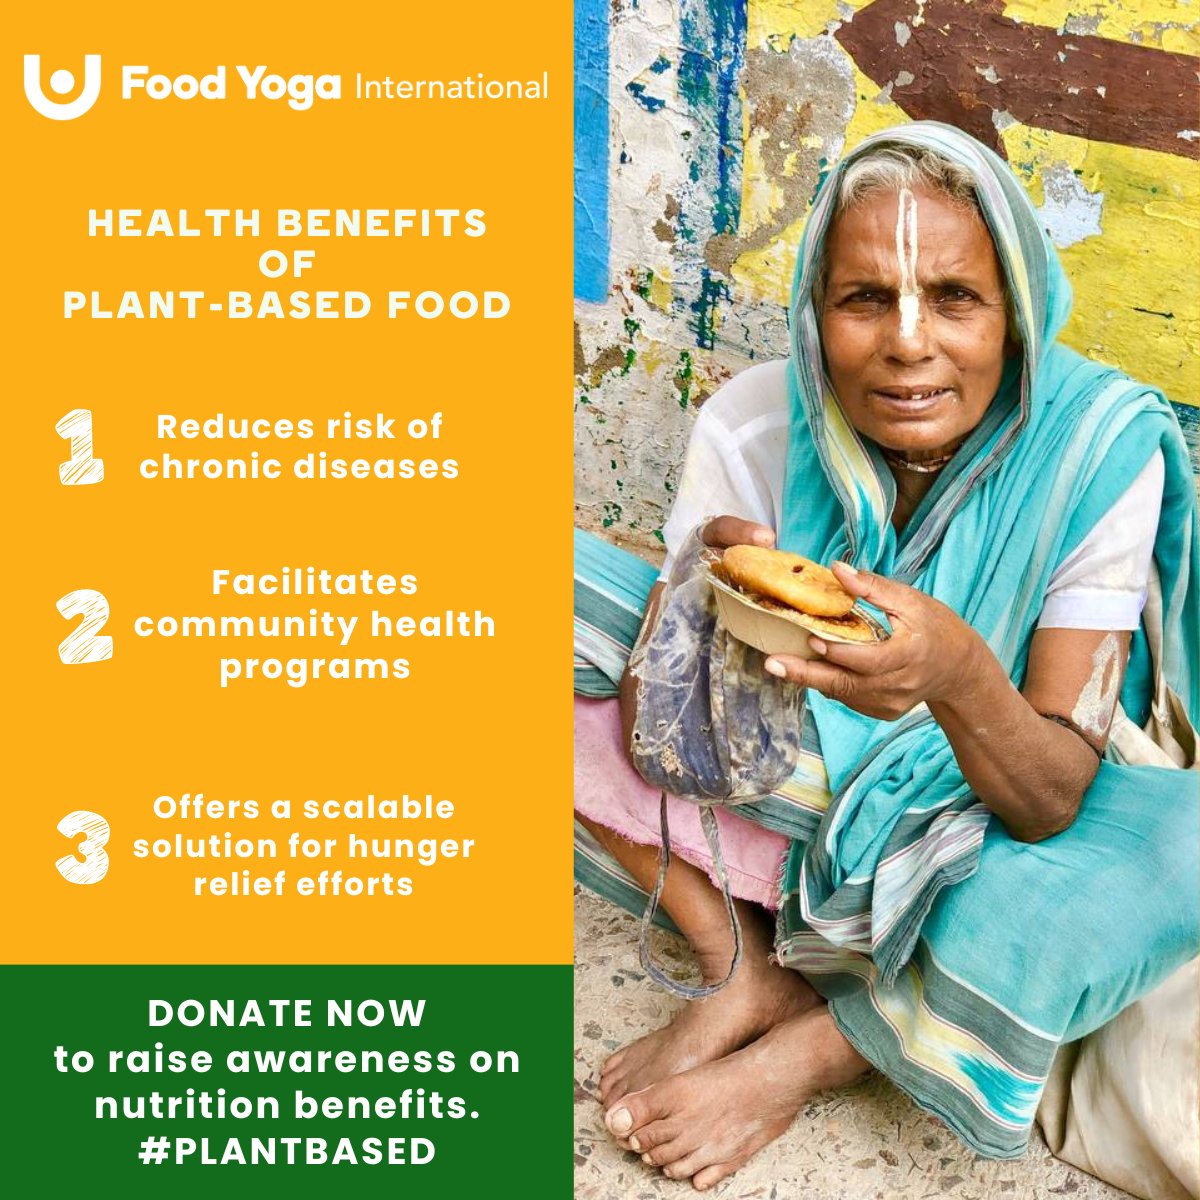 Our initiatives support dietary diversity, enhance public health, and provide scalable solutions to hunger. Learn about the transformative impact of our plant-based meal programs!

#donation #donate #charity #charities #foodyogainternational #foodforlifeglobal #Cryptocurency…